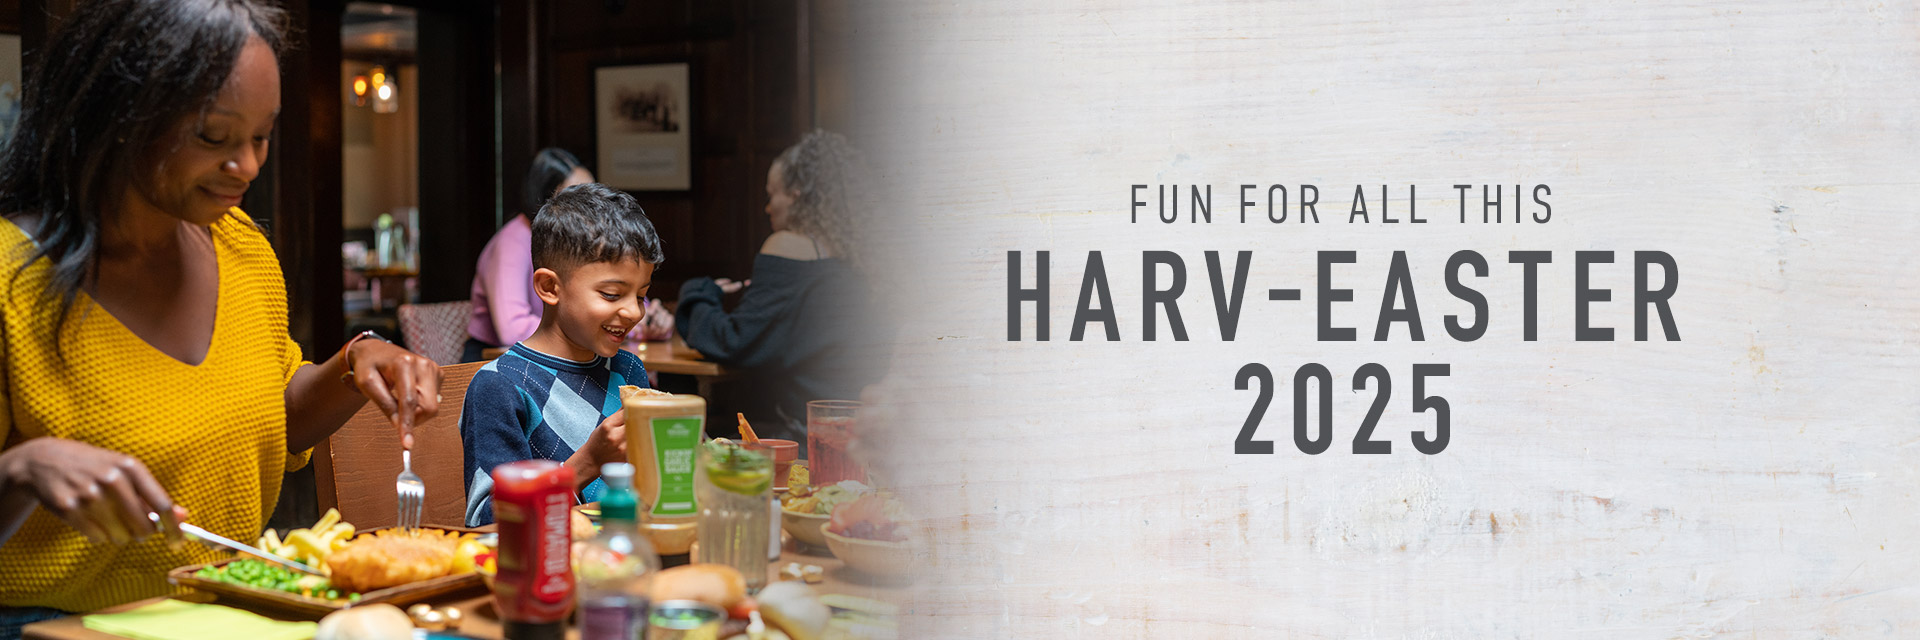 Easter at Harvester Meadowhall in Sheffield 2025